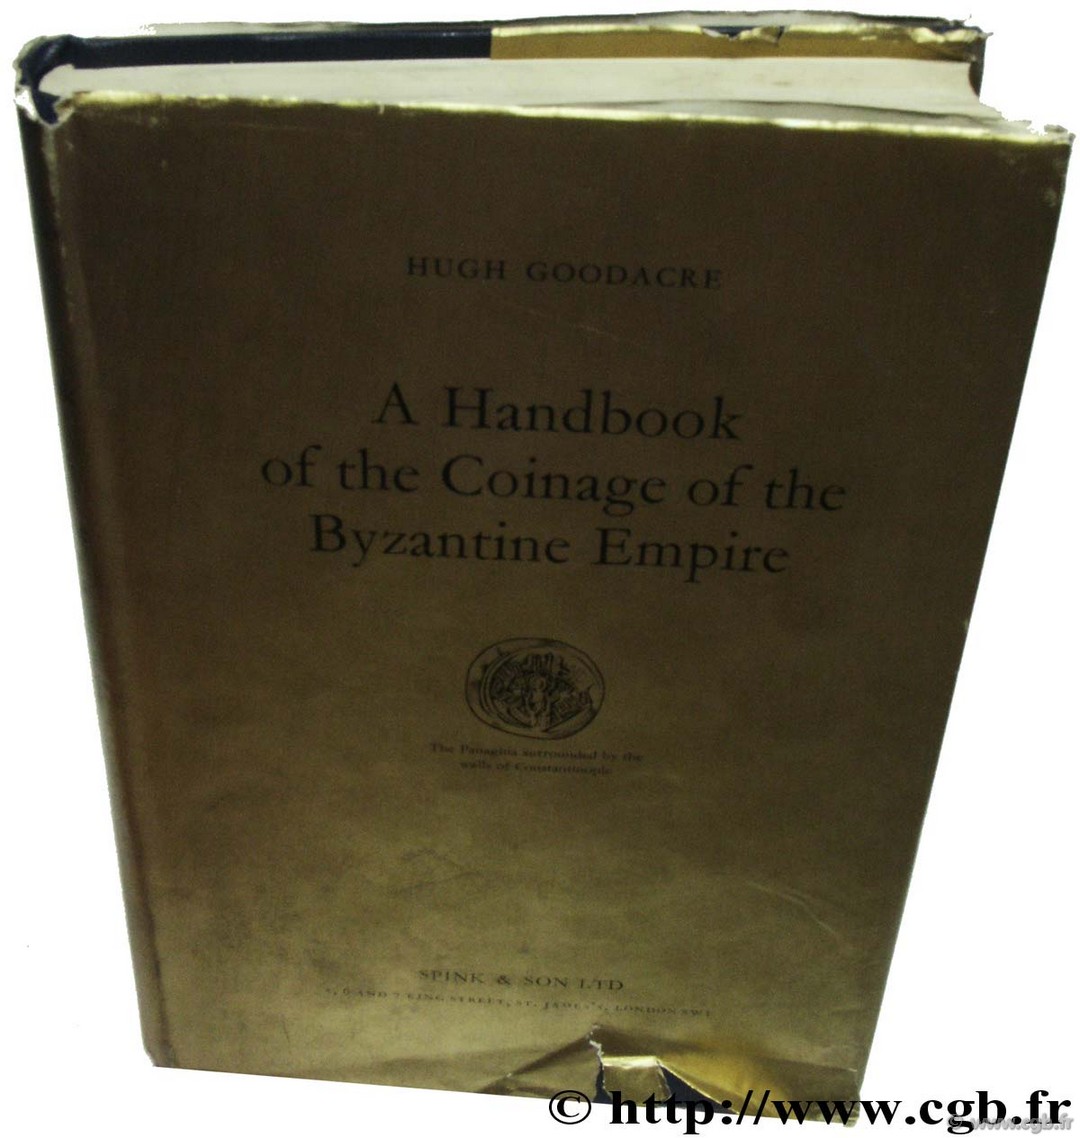 A handbook of the coinage of the byzantine empire GOODACRE H.